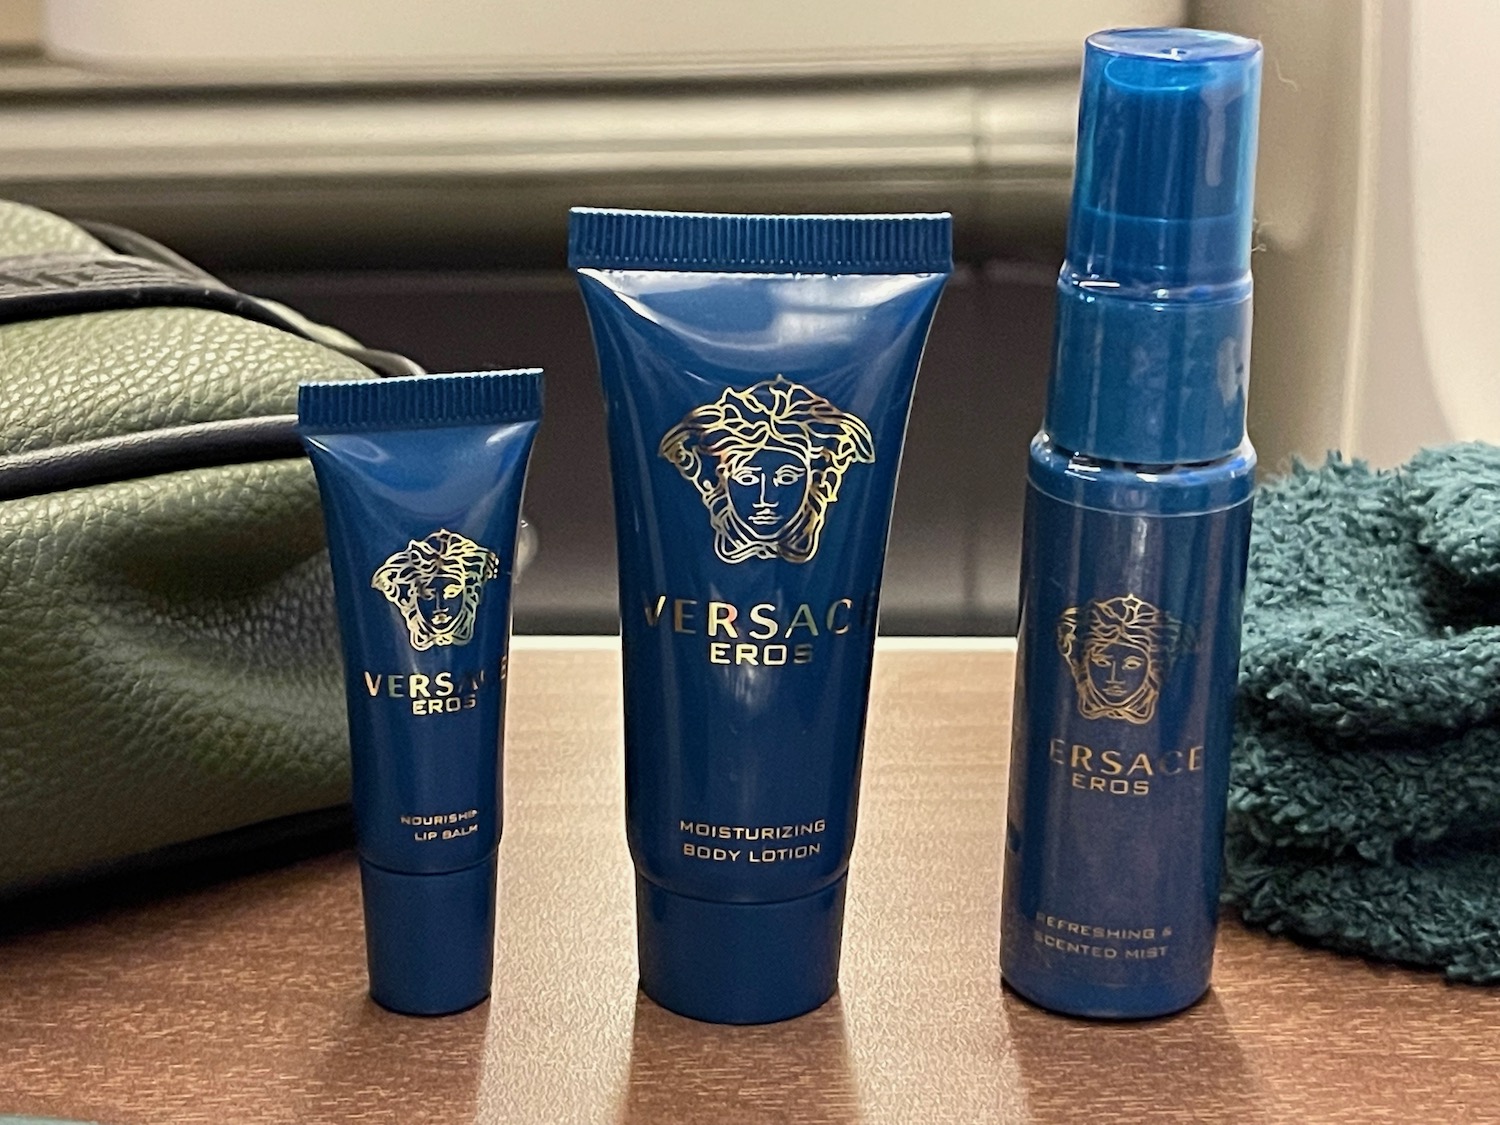 a group of blue bottles and a blue bottle of body lotion